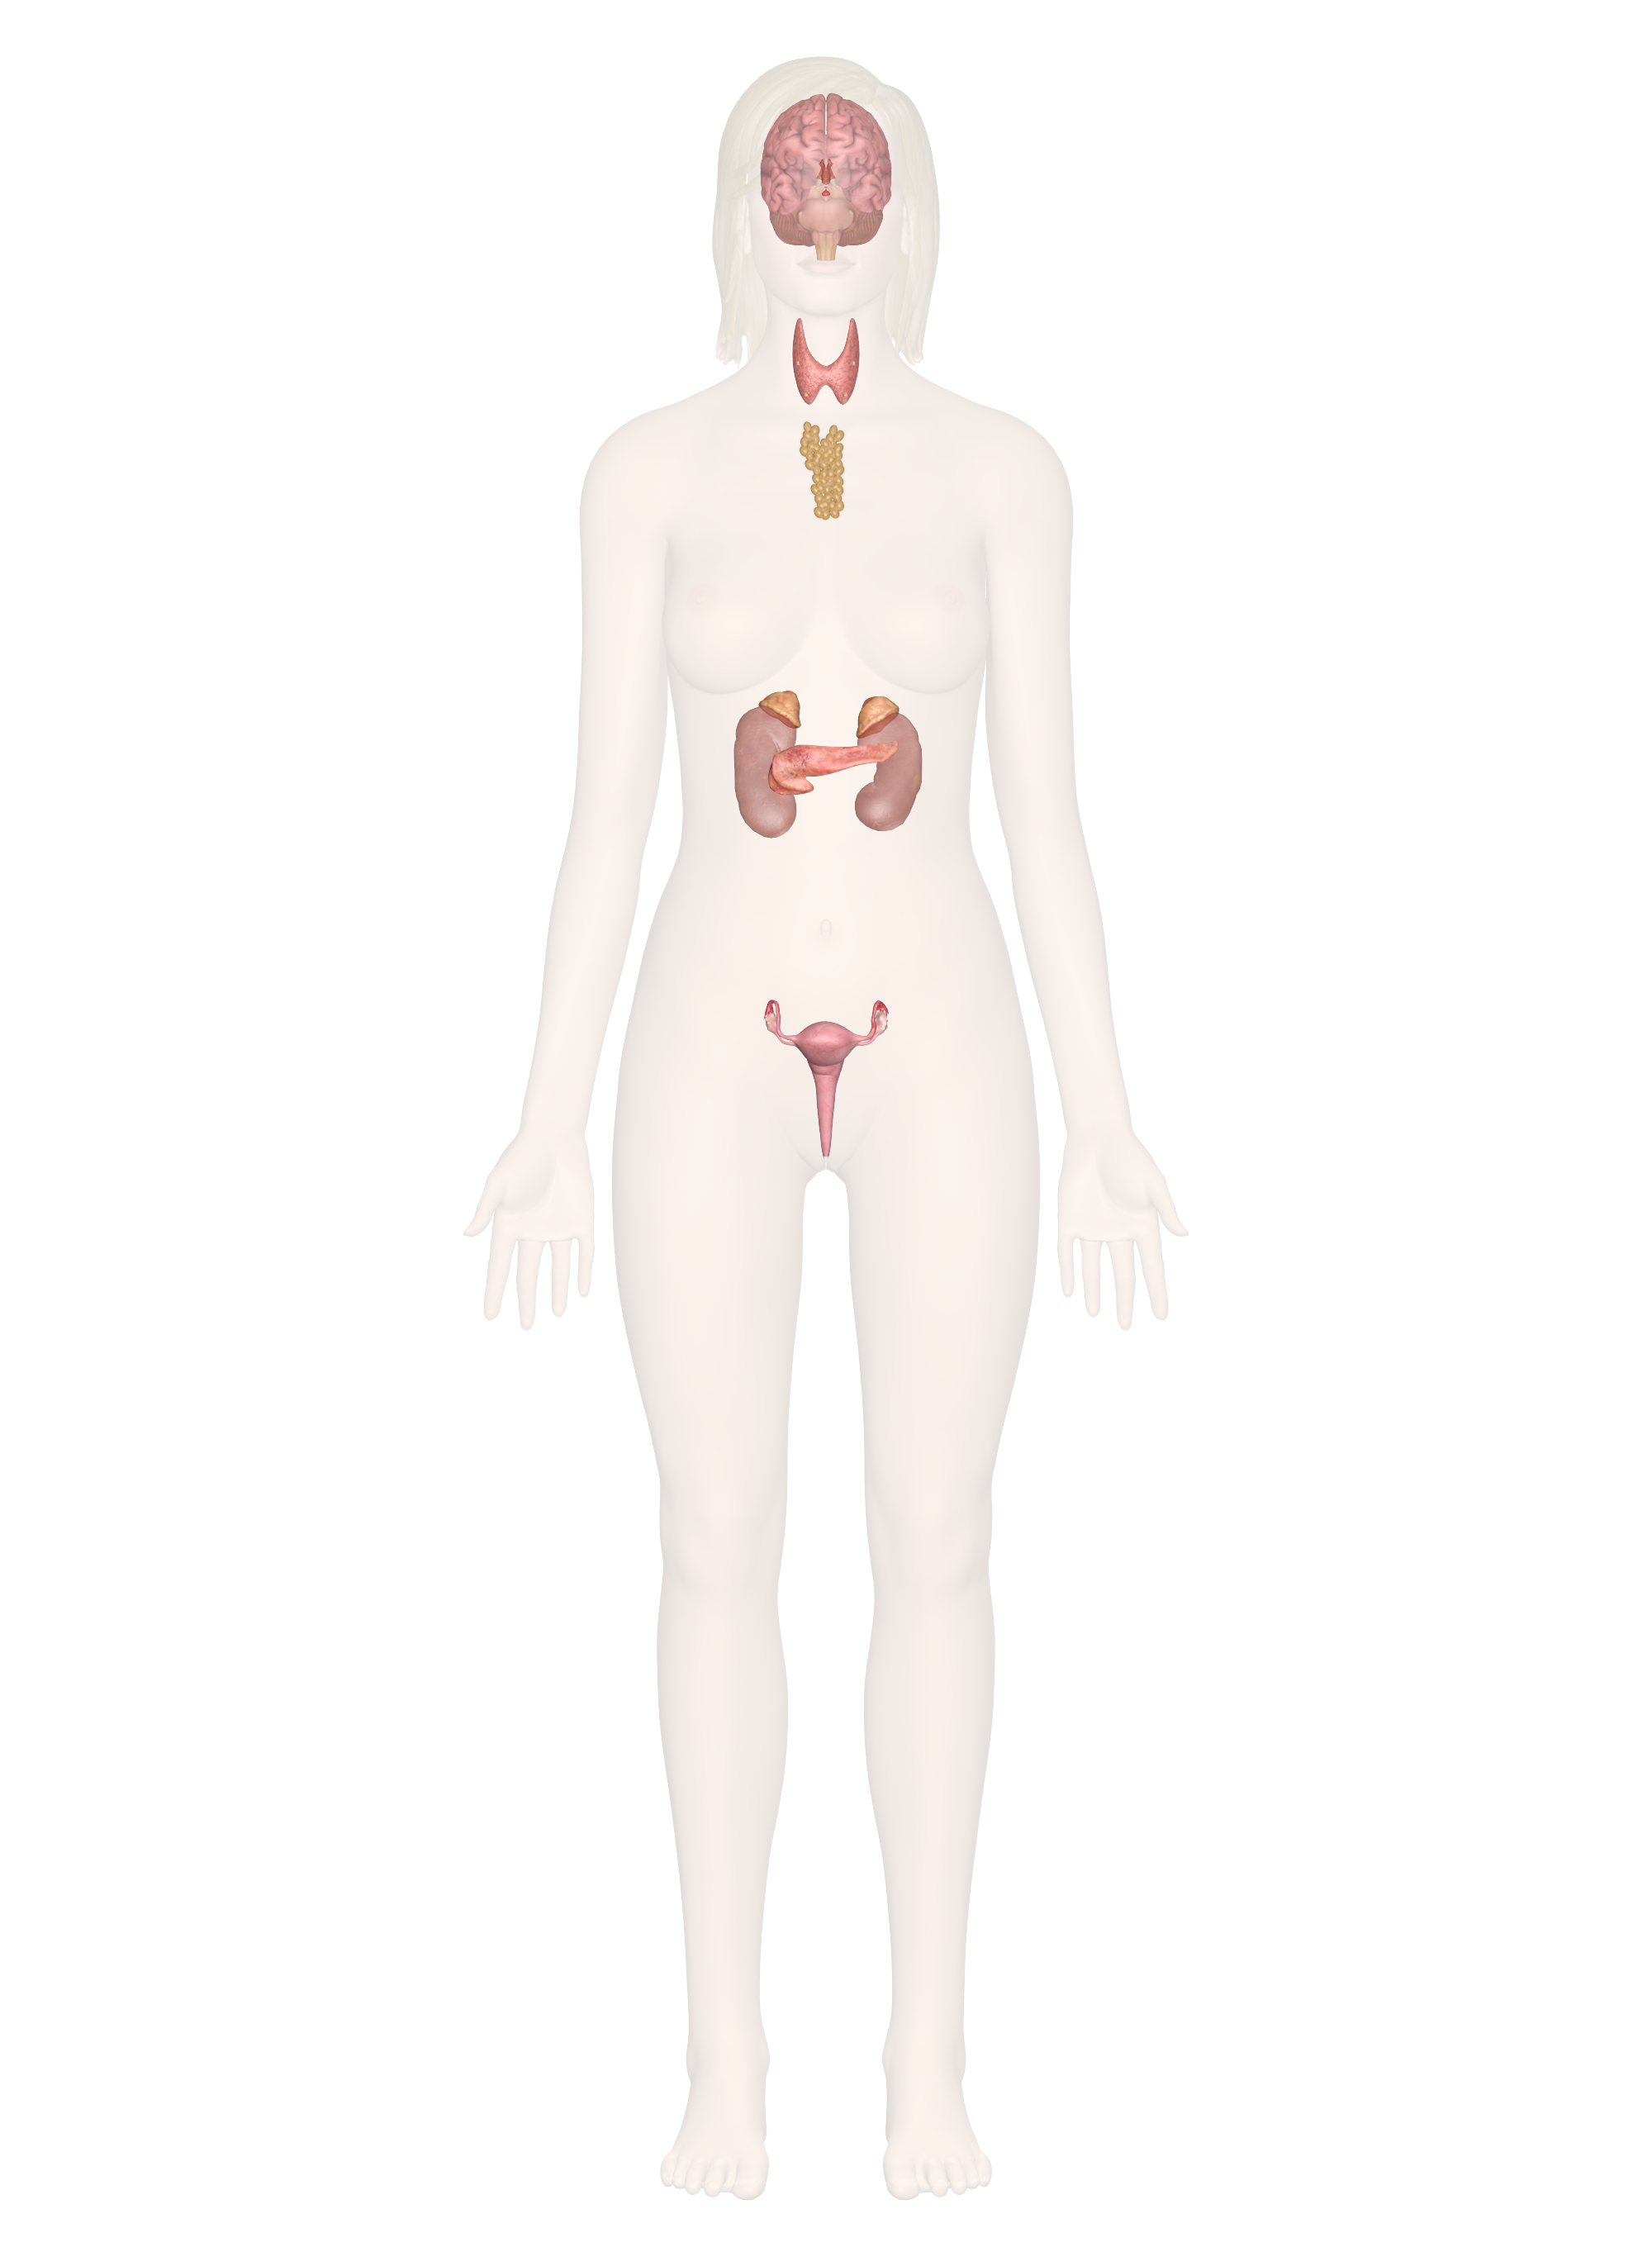 Endocrine System Diagram Endocrine System Discover The Anatomy And Function Of Glands